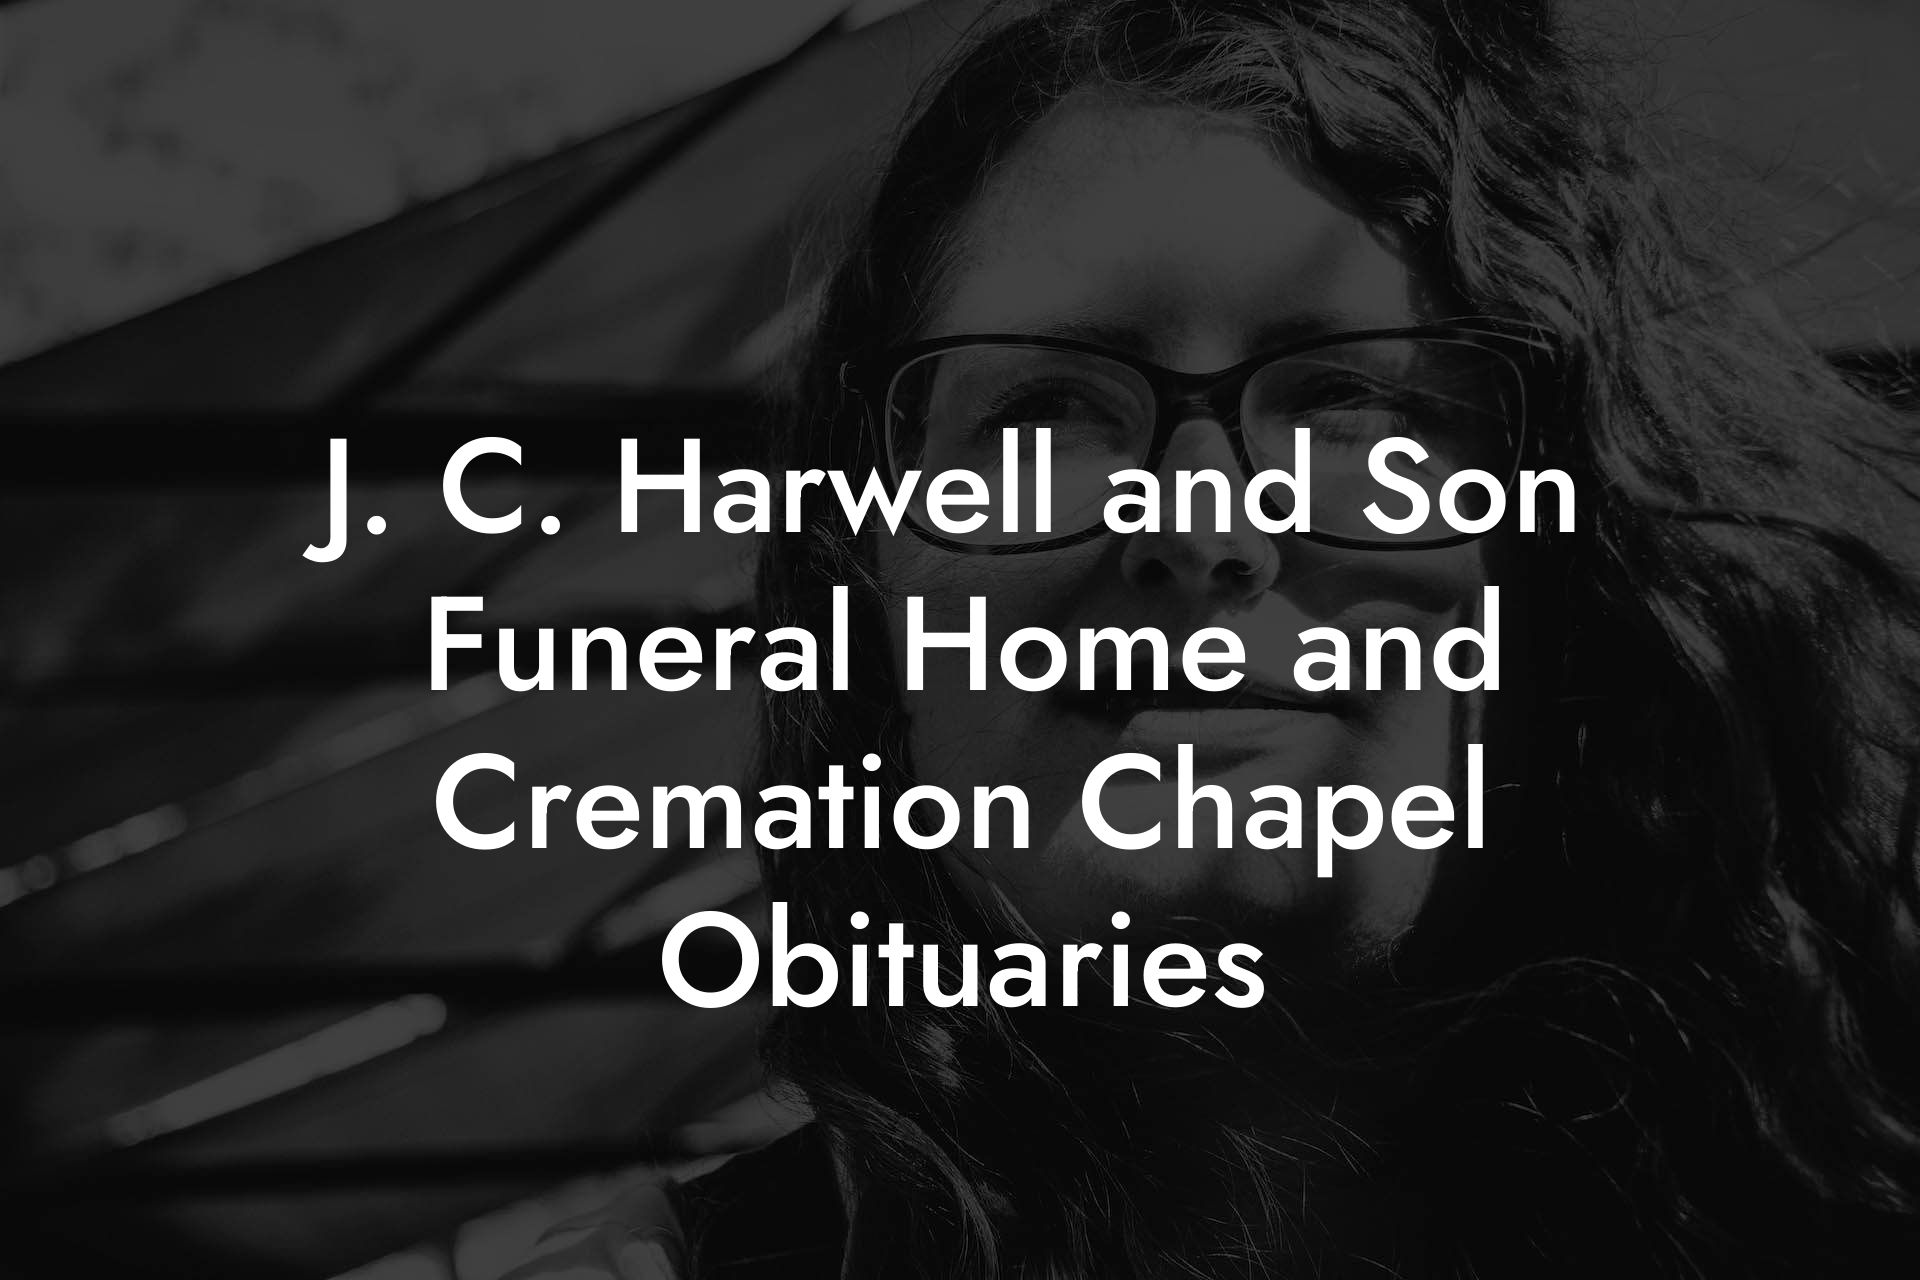 J. C. Harwell and Son Funeral Home and Cremation Chapel Obituaries